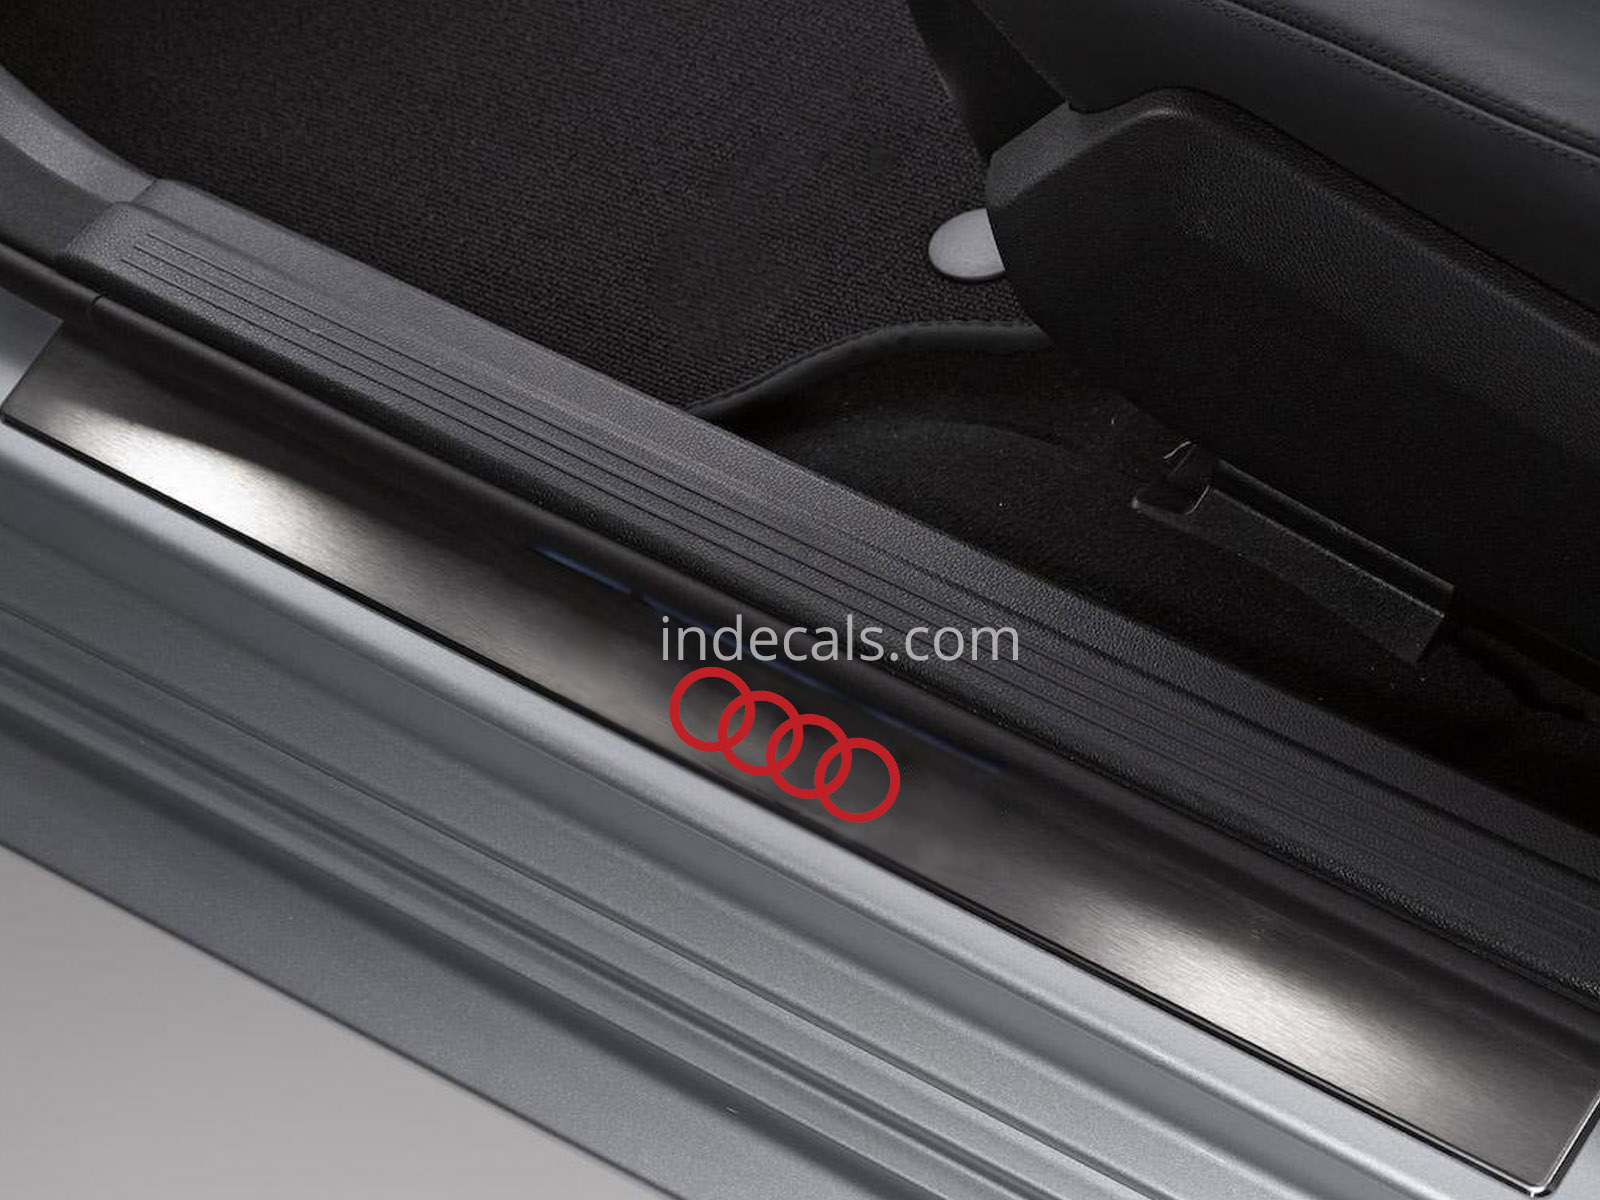 6 x Audi Rings Stickers for Door Sills - Red